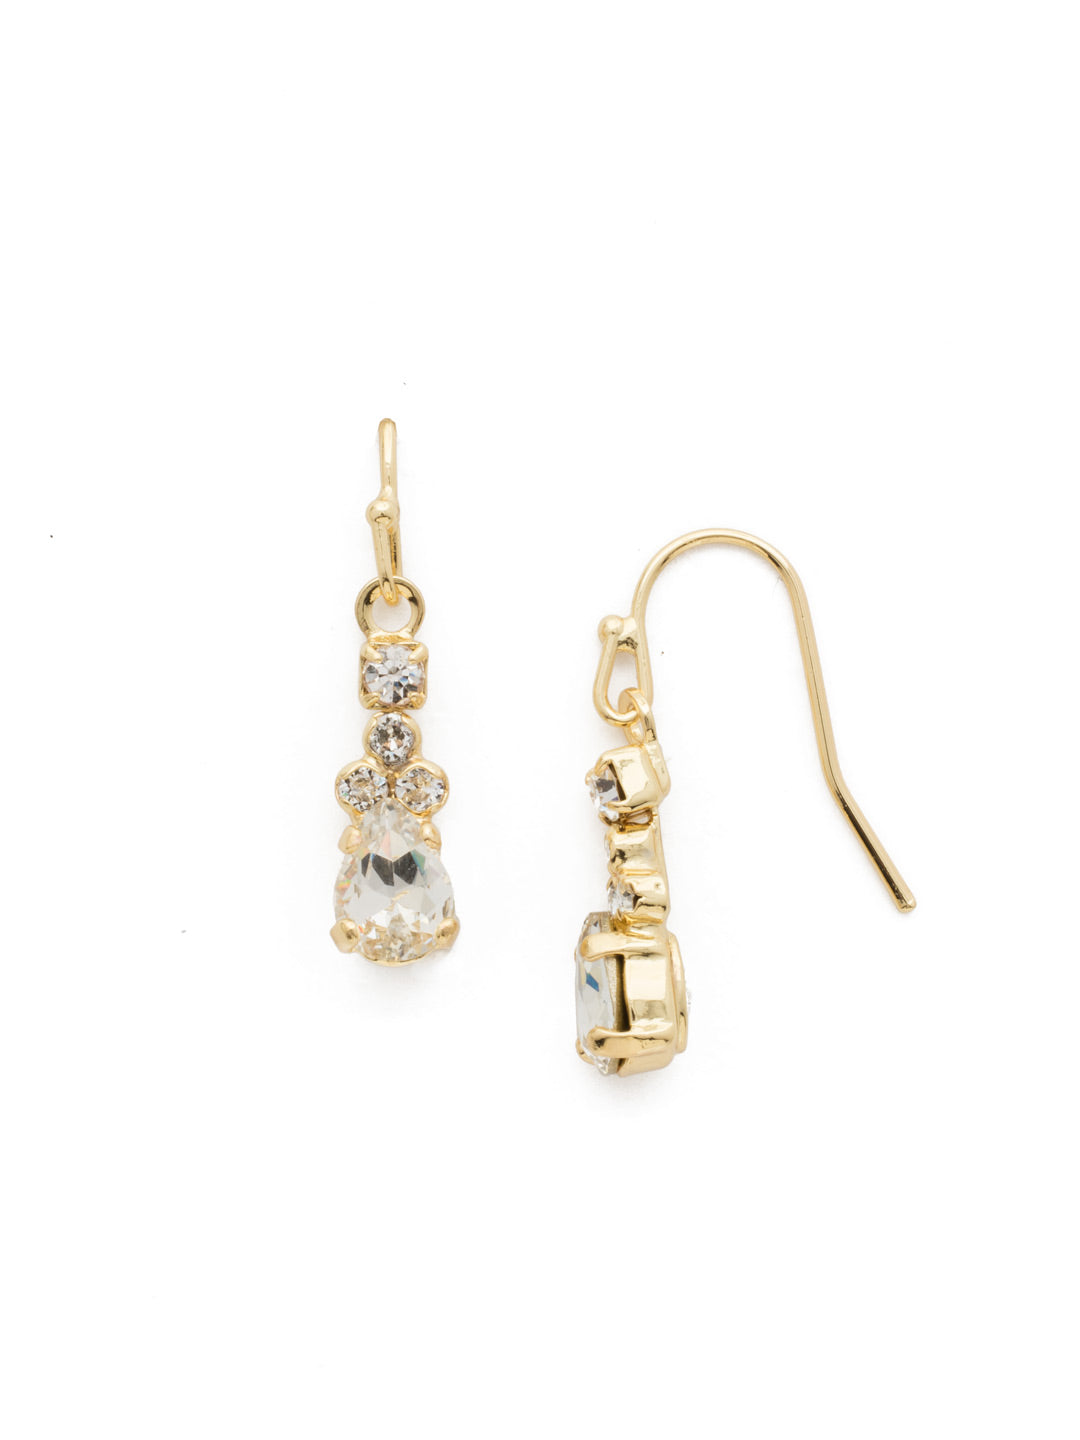 Petite Poire Earring - EDN87BGCRY - <p>A petite style that offers subtle sparkle for everyday wear. From Sorrelli's Crystal collection in our Bright Gold-tone finish.</p>